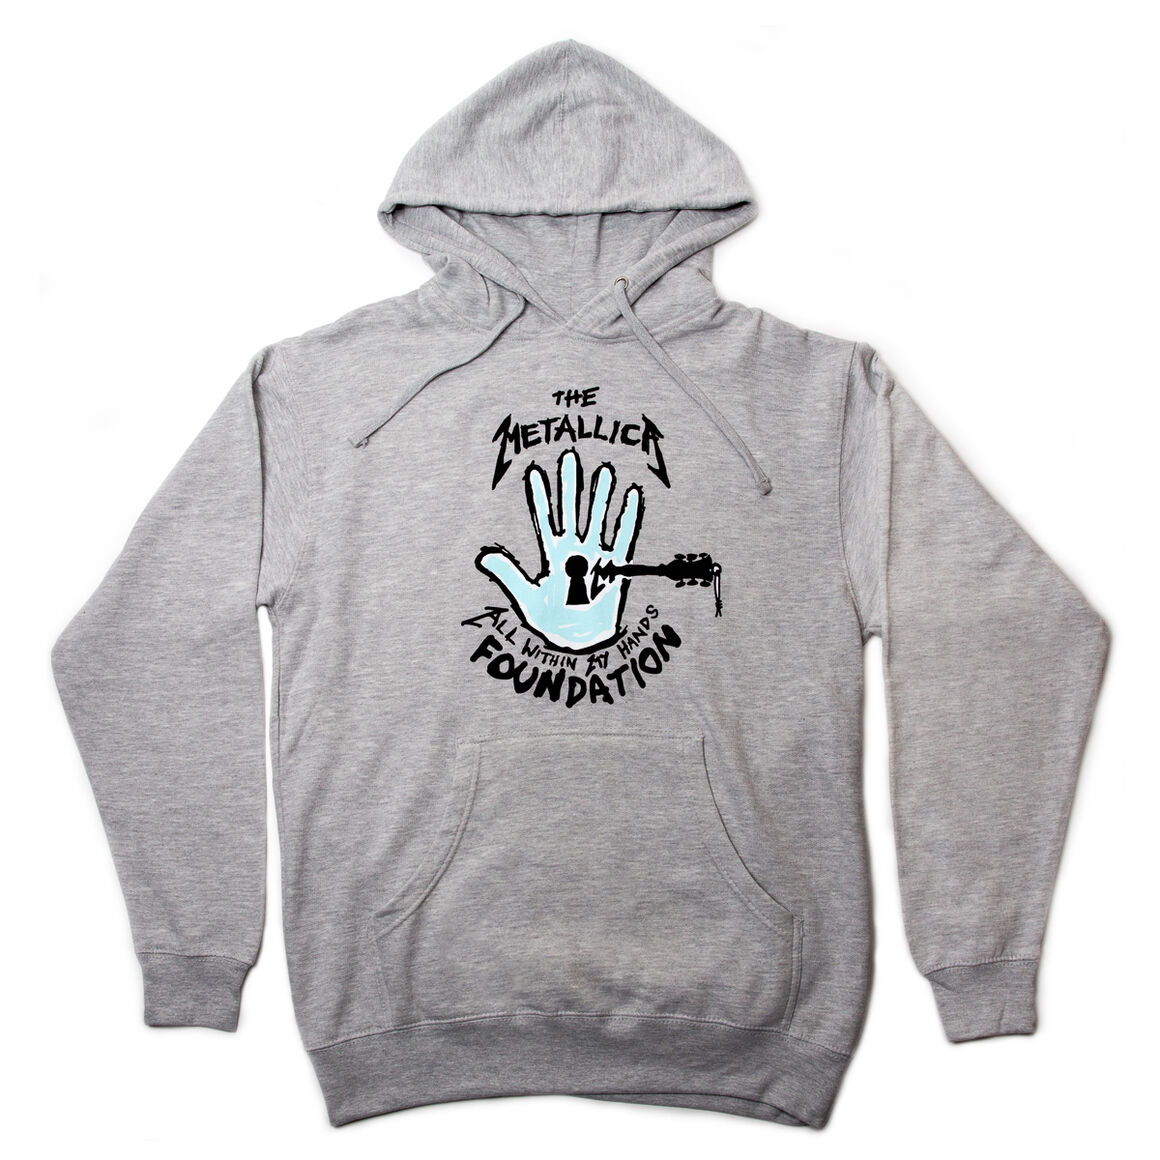 All Within My Hands Pullover Hoodie (Grey), , hi-res